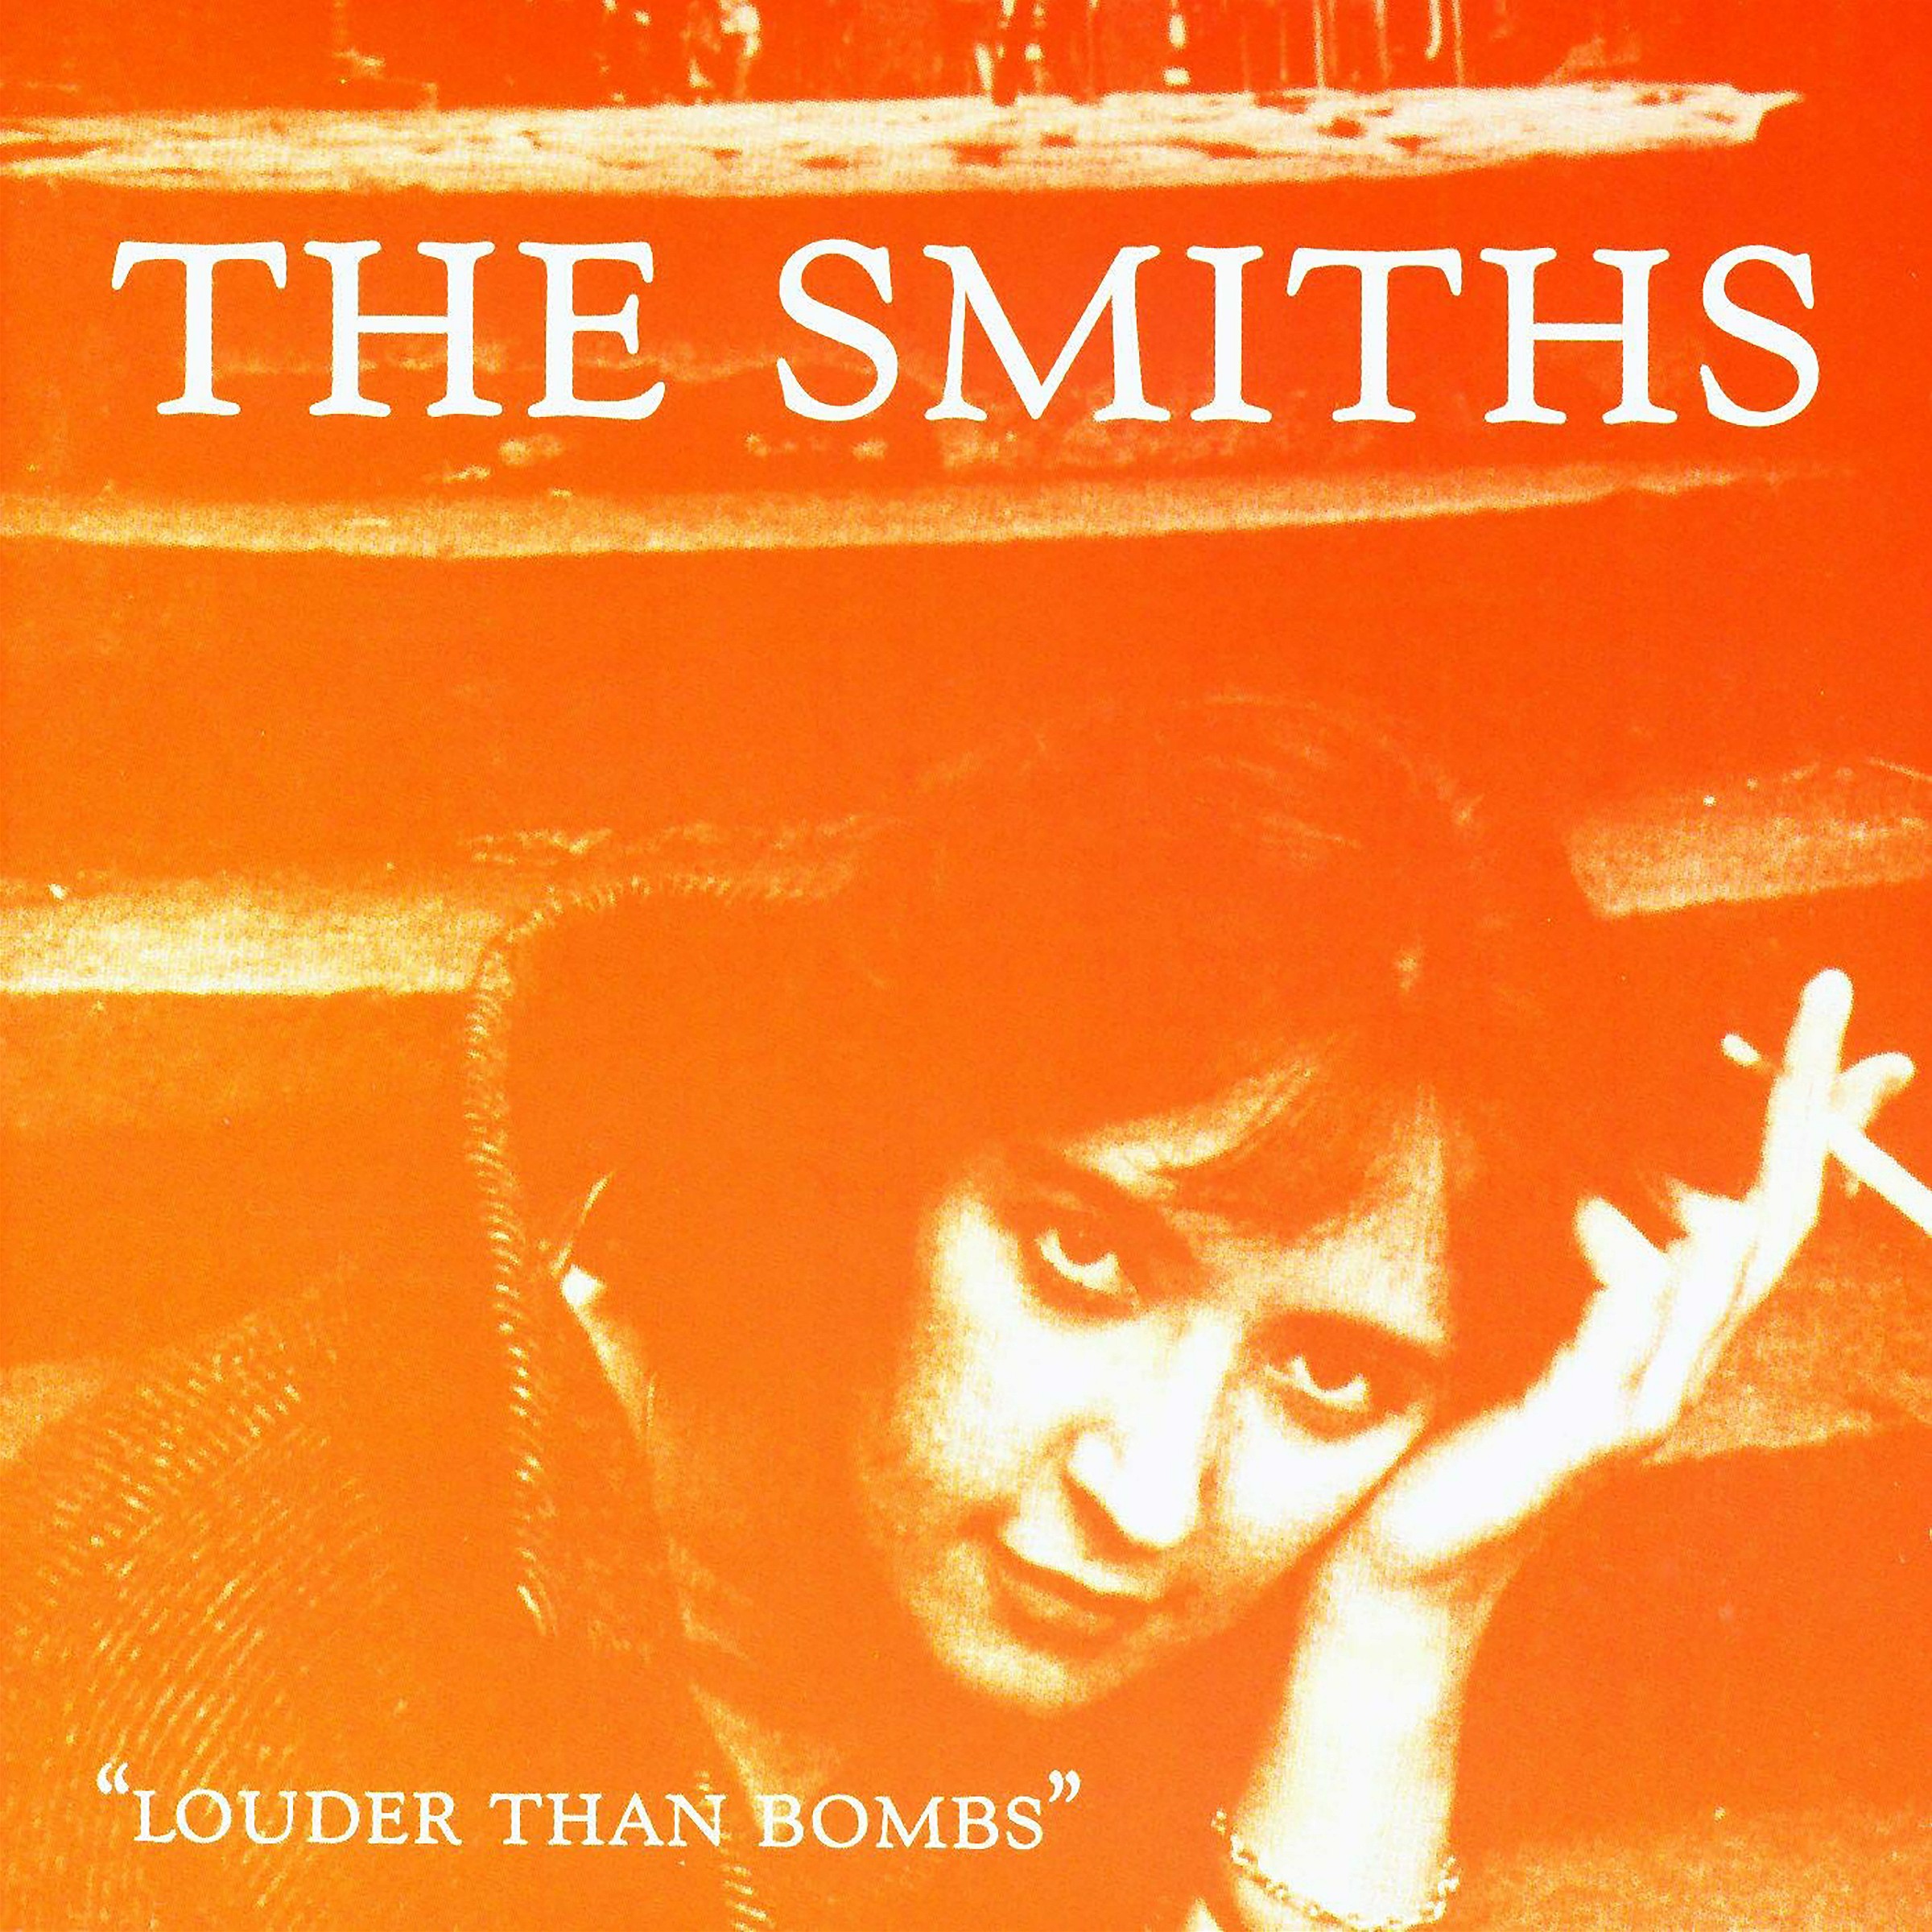 the smiths album cover posters